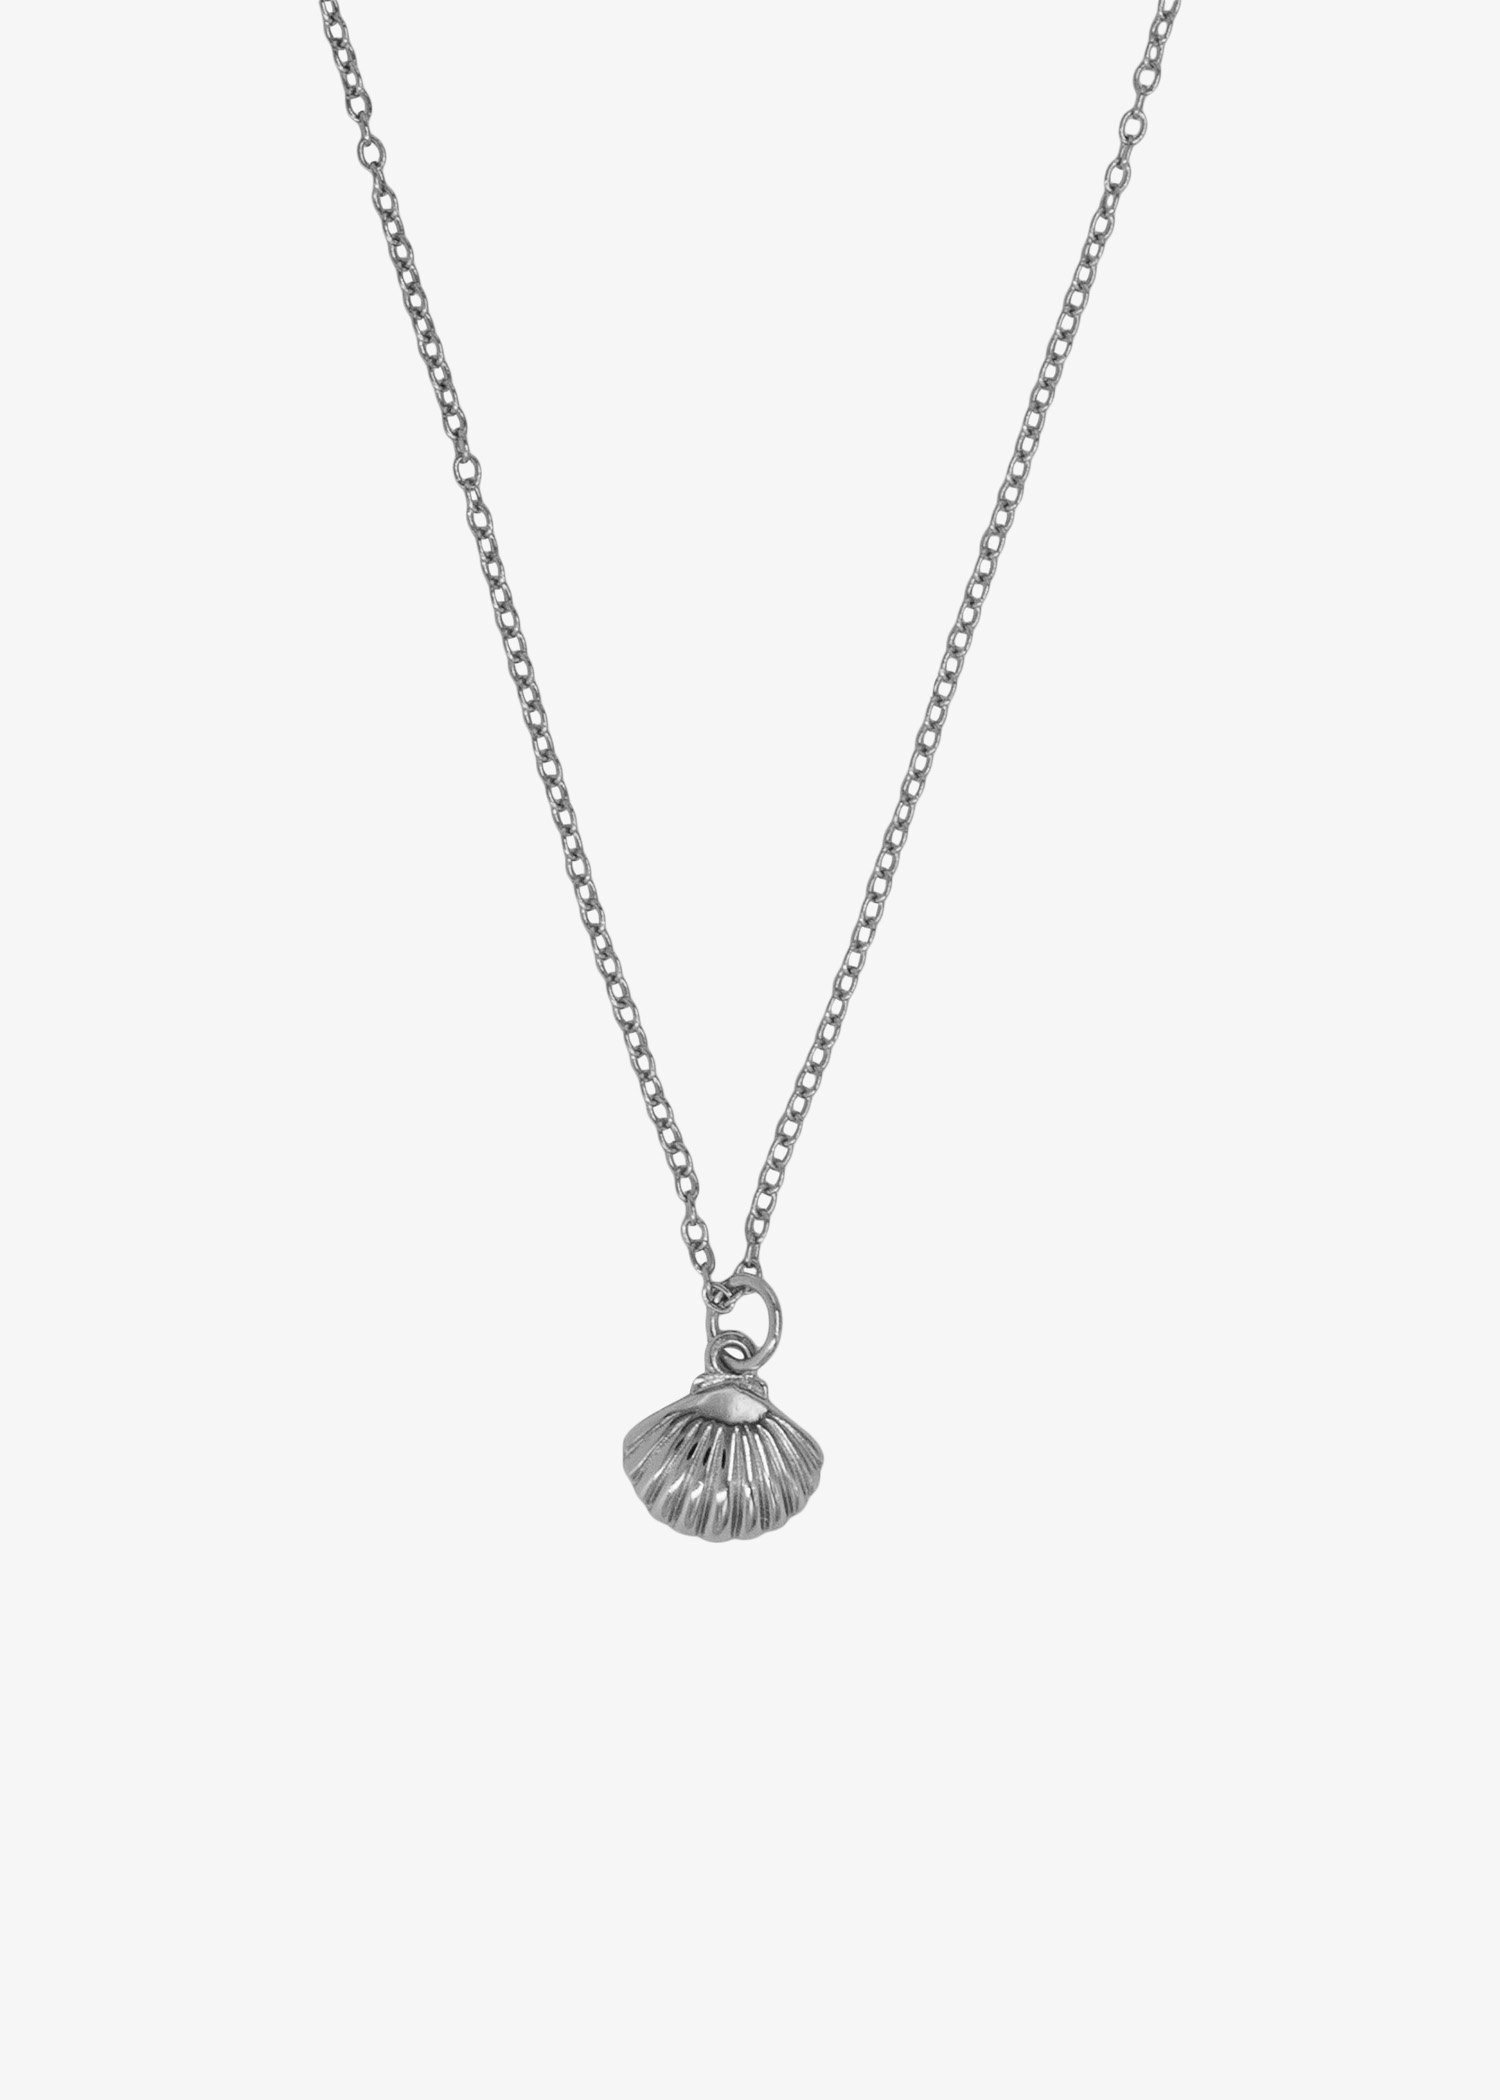 Seashell Charm Necklace, Expandable - Alex and Ani